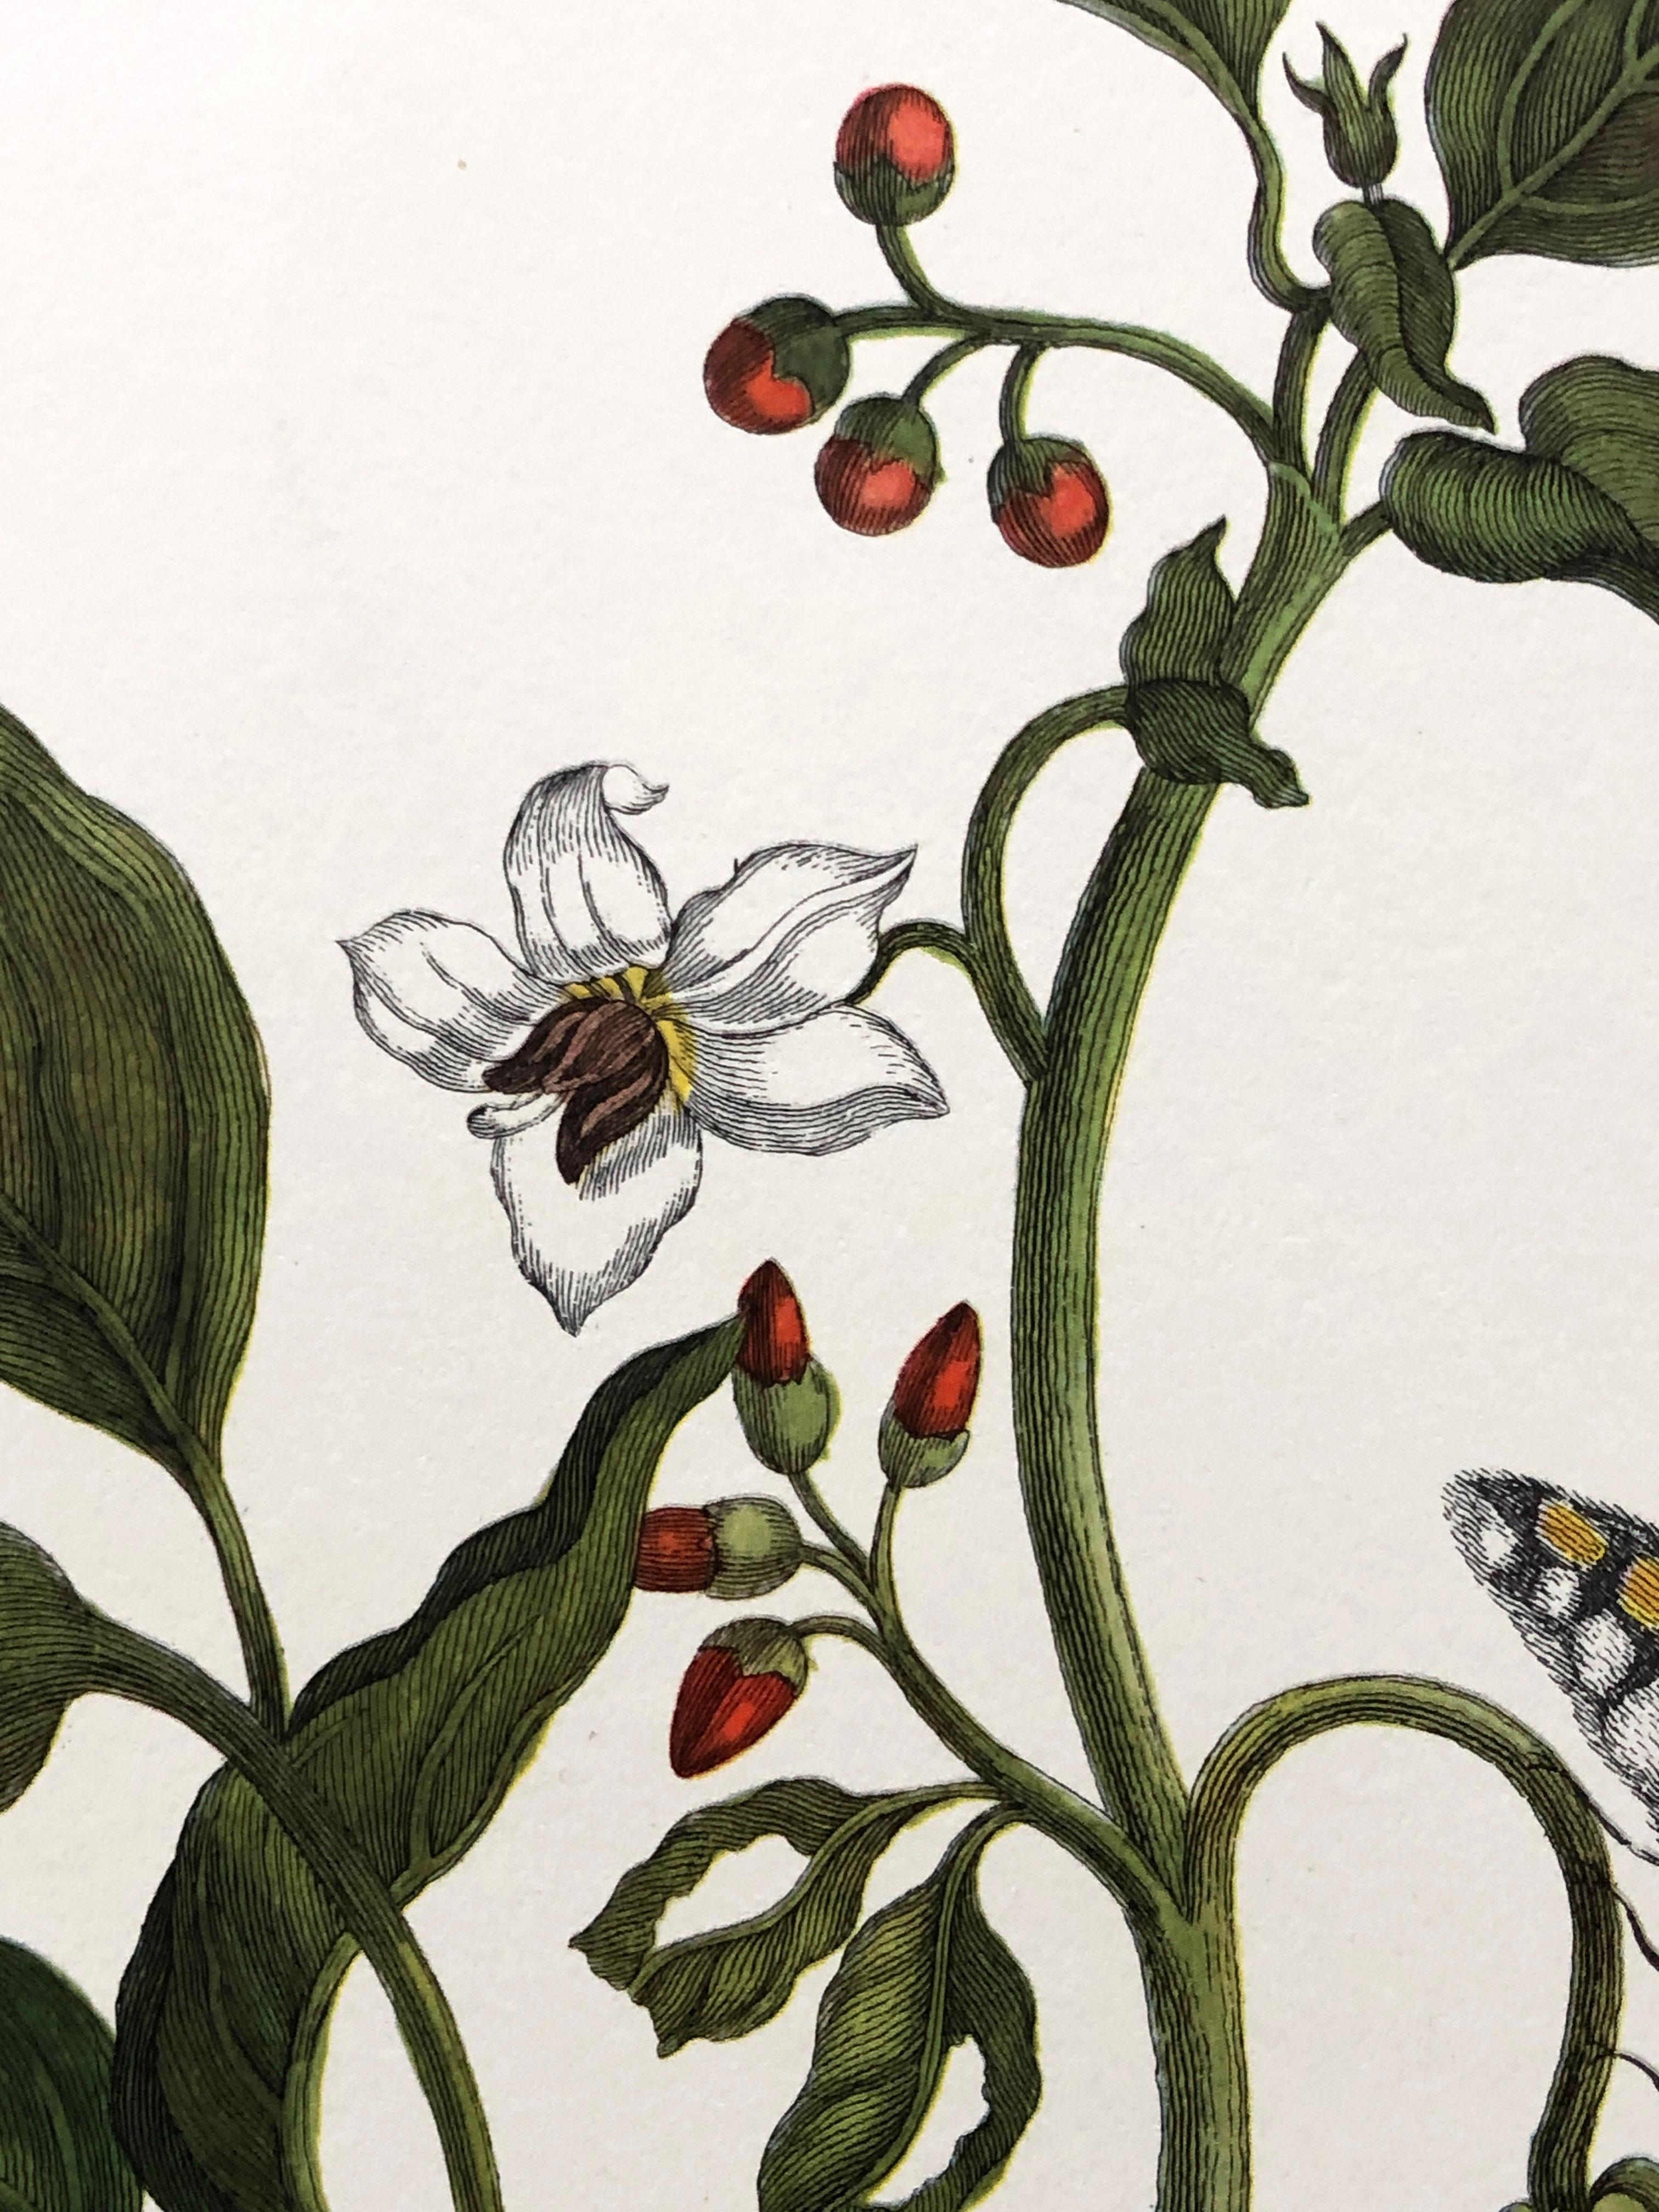 Maria Sibylla Merian - P. Sluyter - Peppers and Hawkmoths Nr. 55 For Sale 2